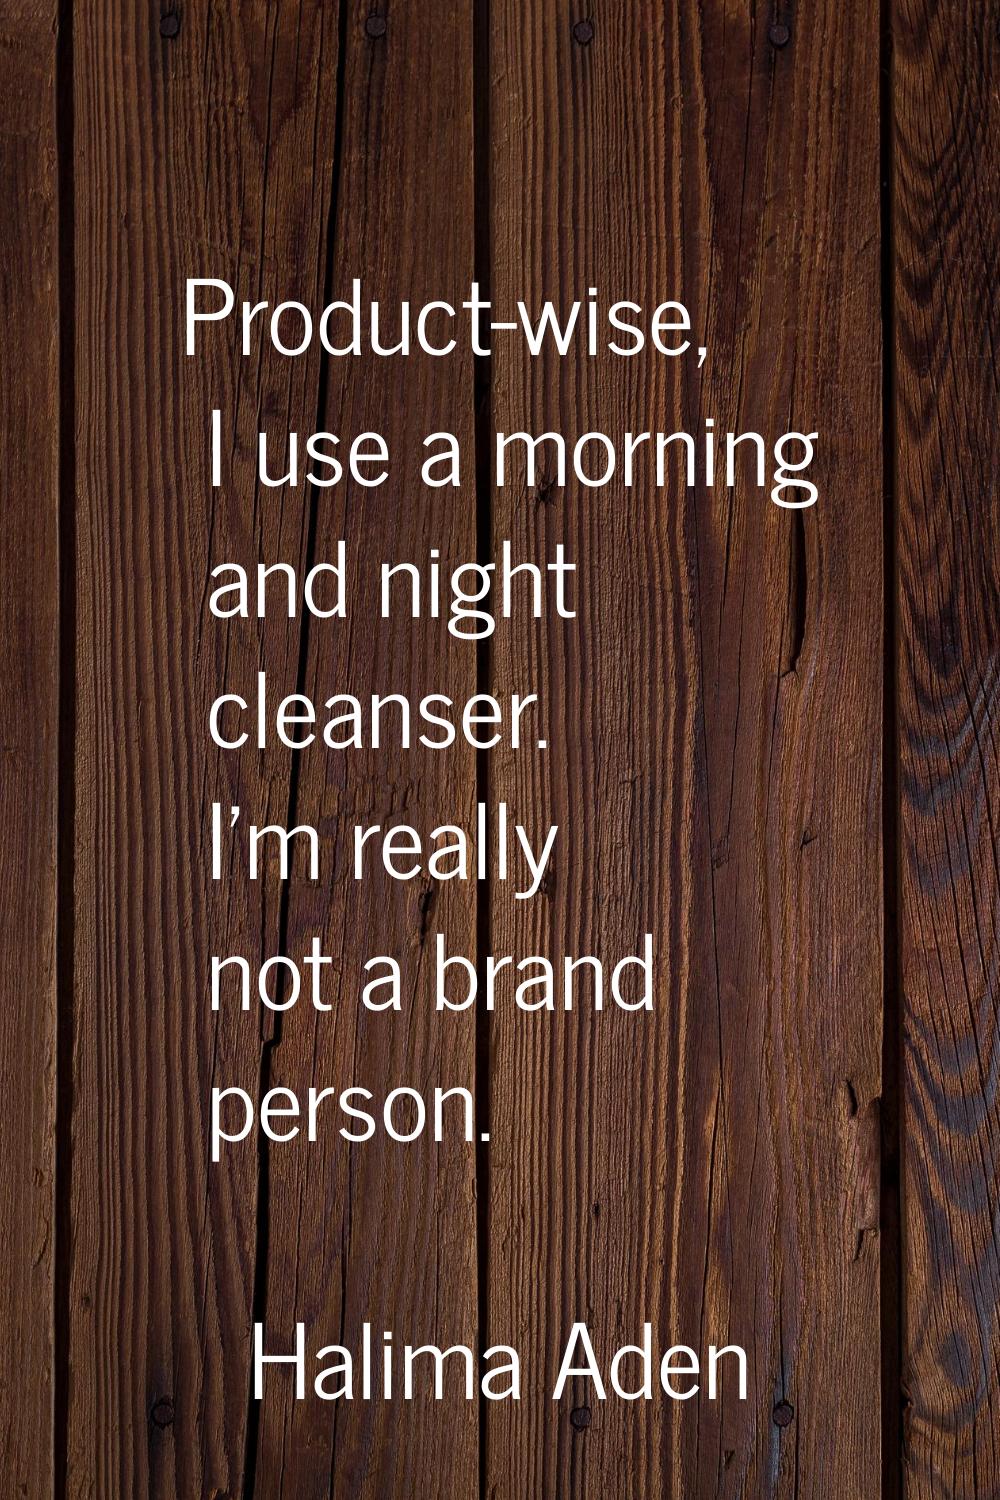 Product-wise, I use a morning and night cleanser. I'm really not a brand person.